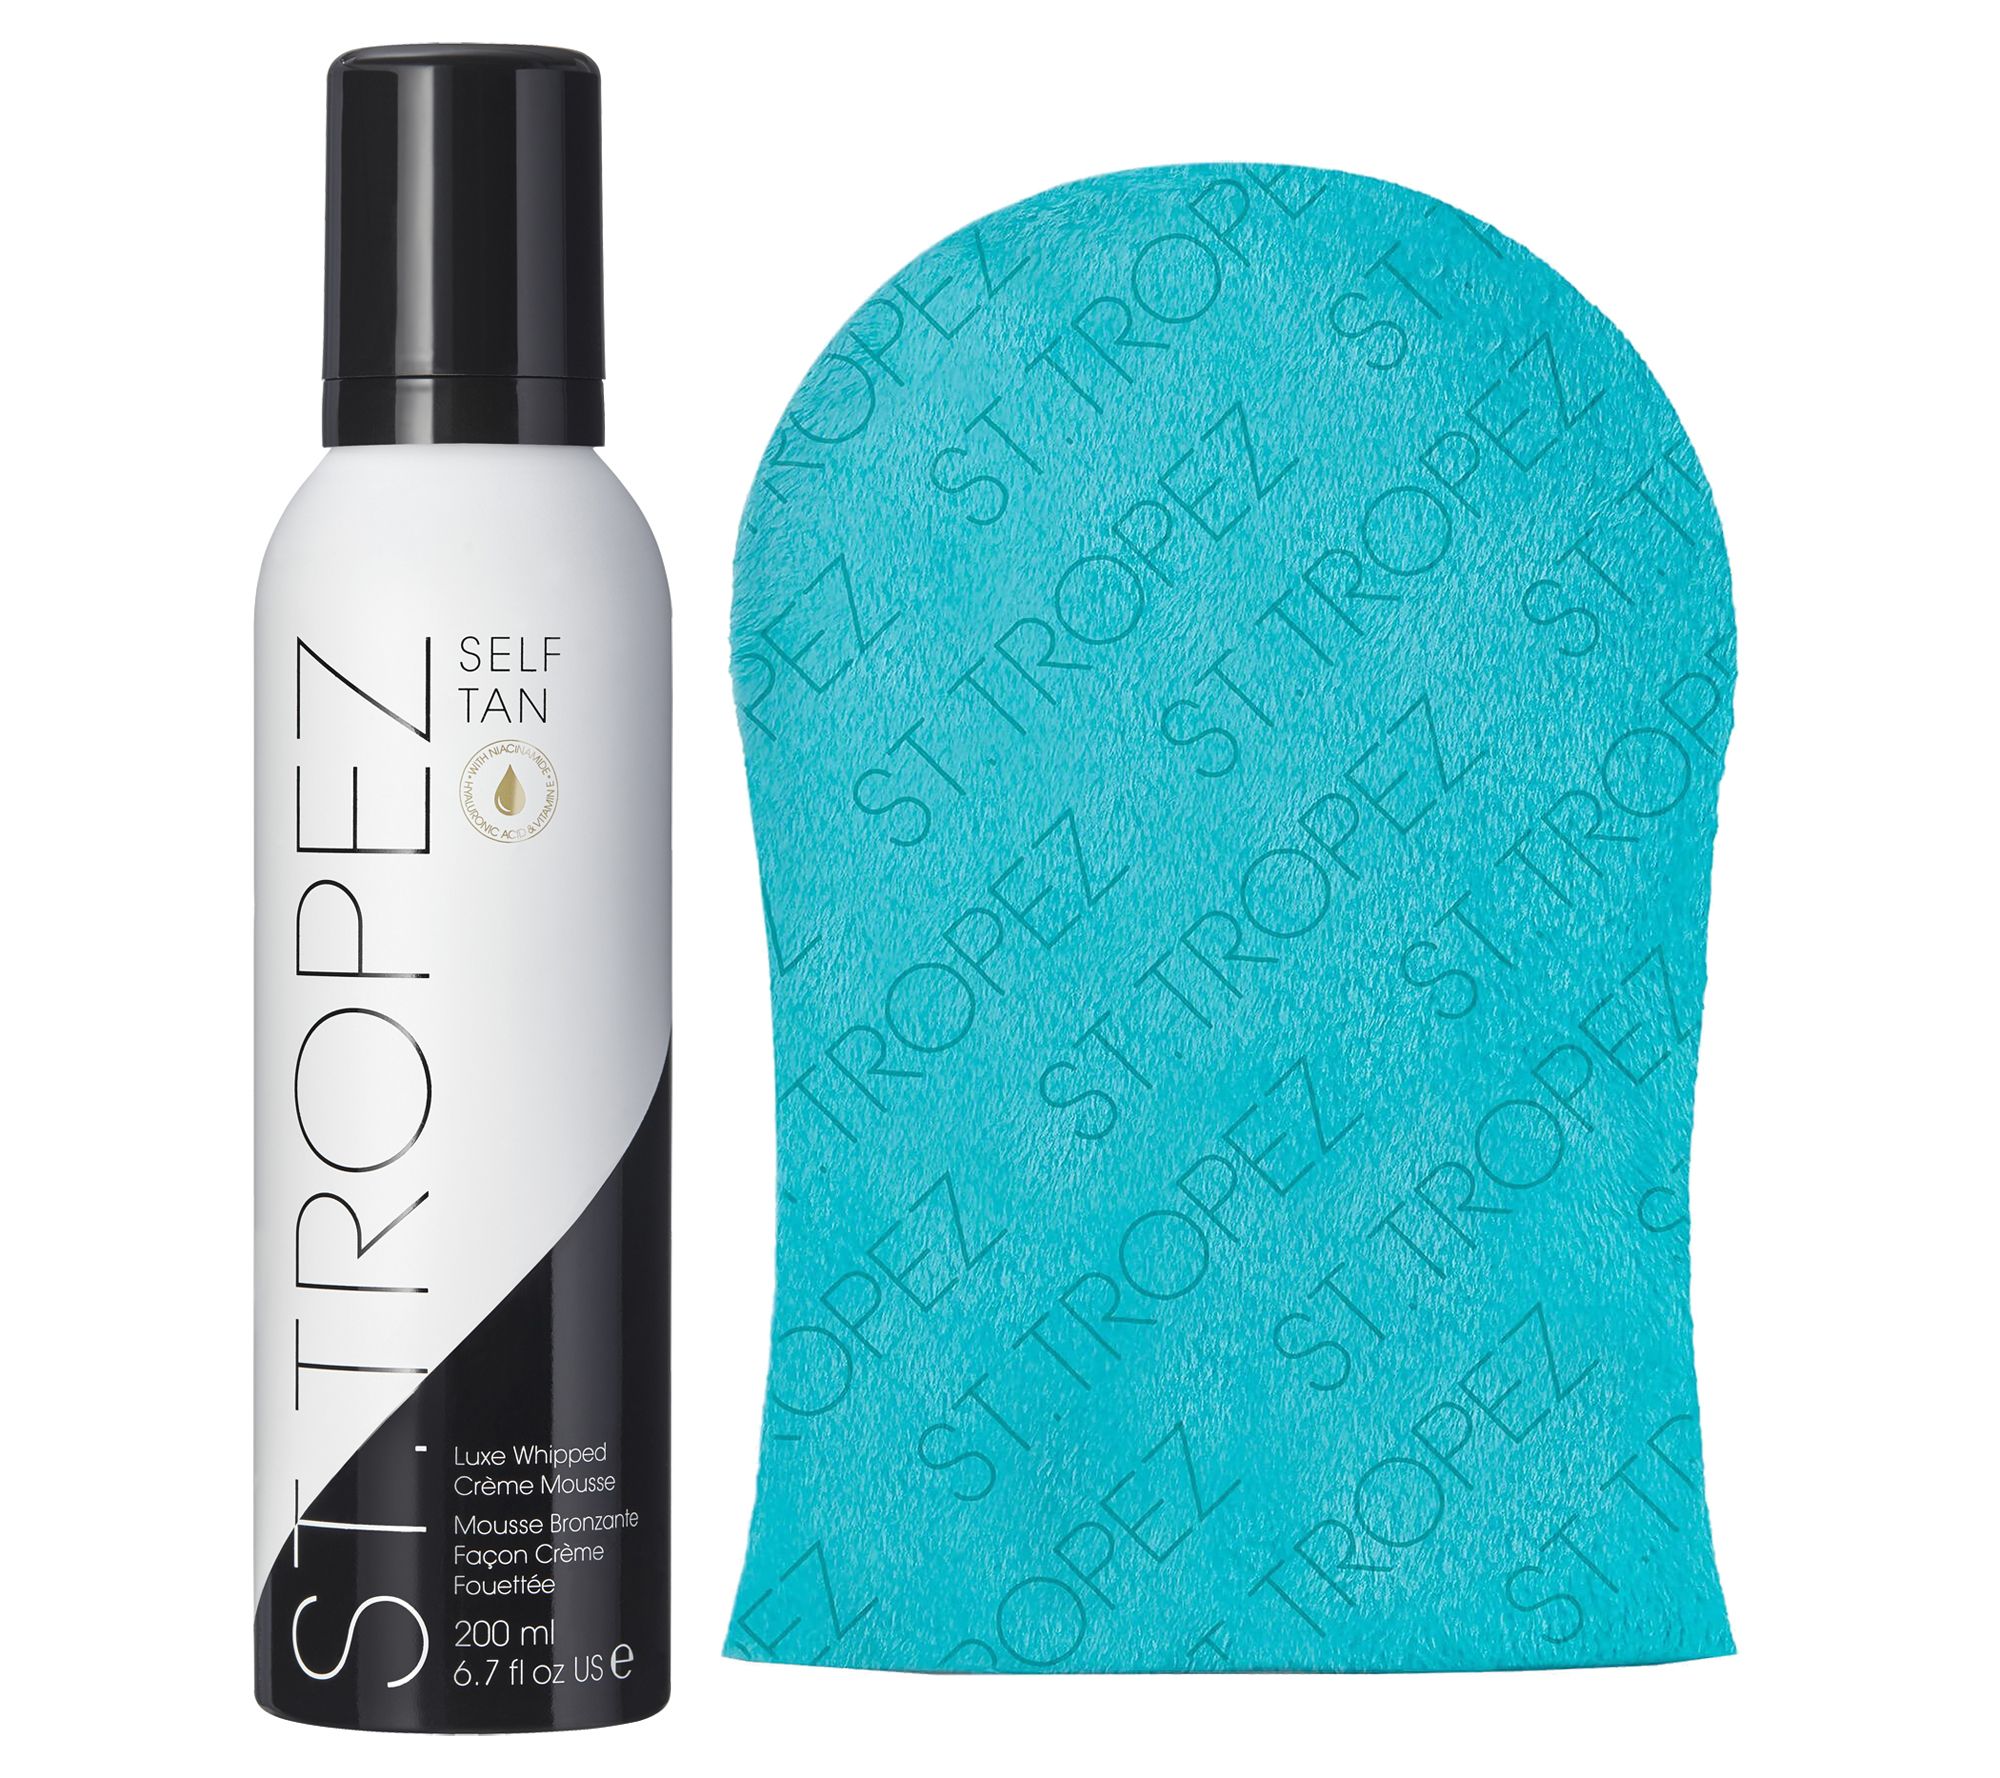 St. Tropez Self with Whipped Mitt Tan Luxe Mousse Creme